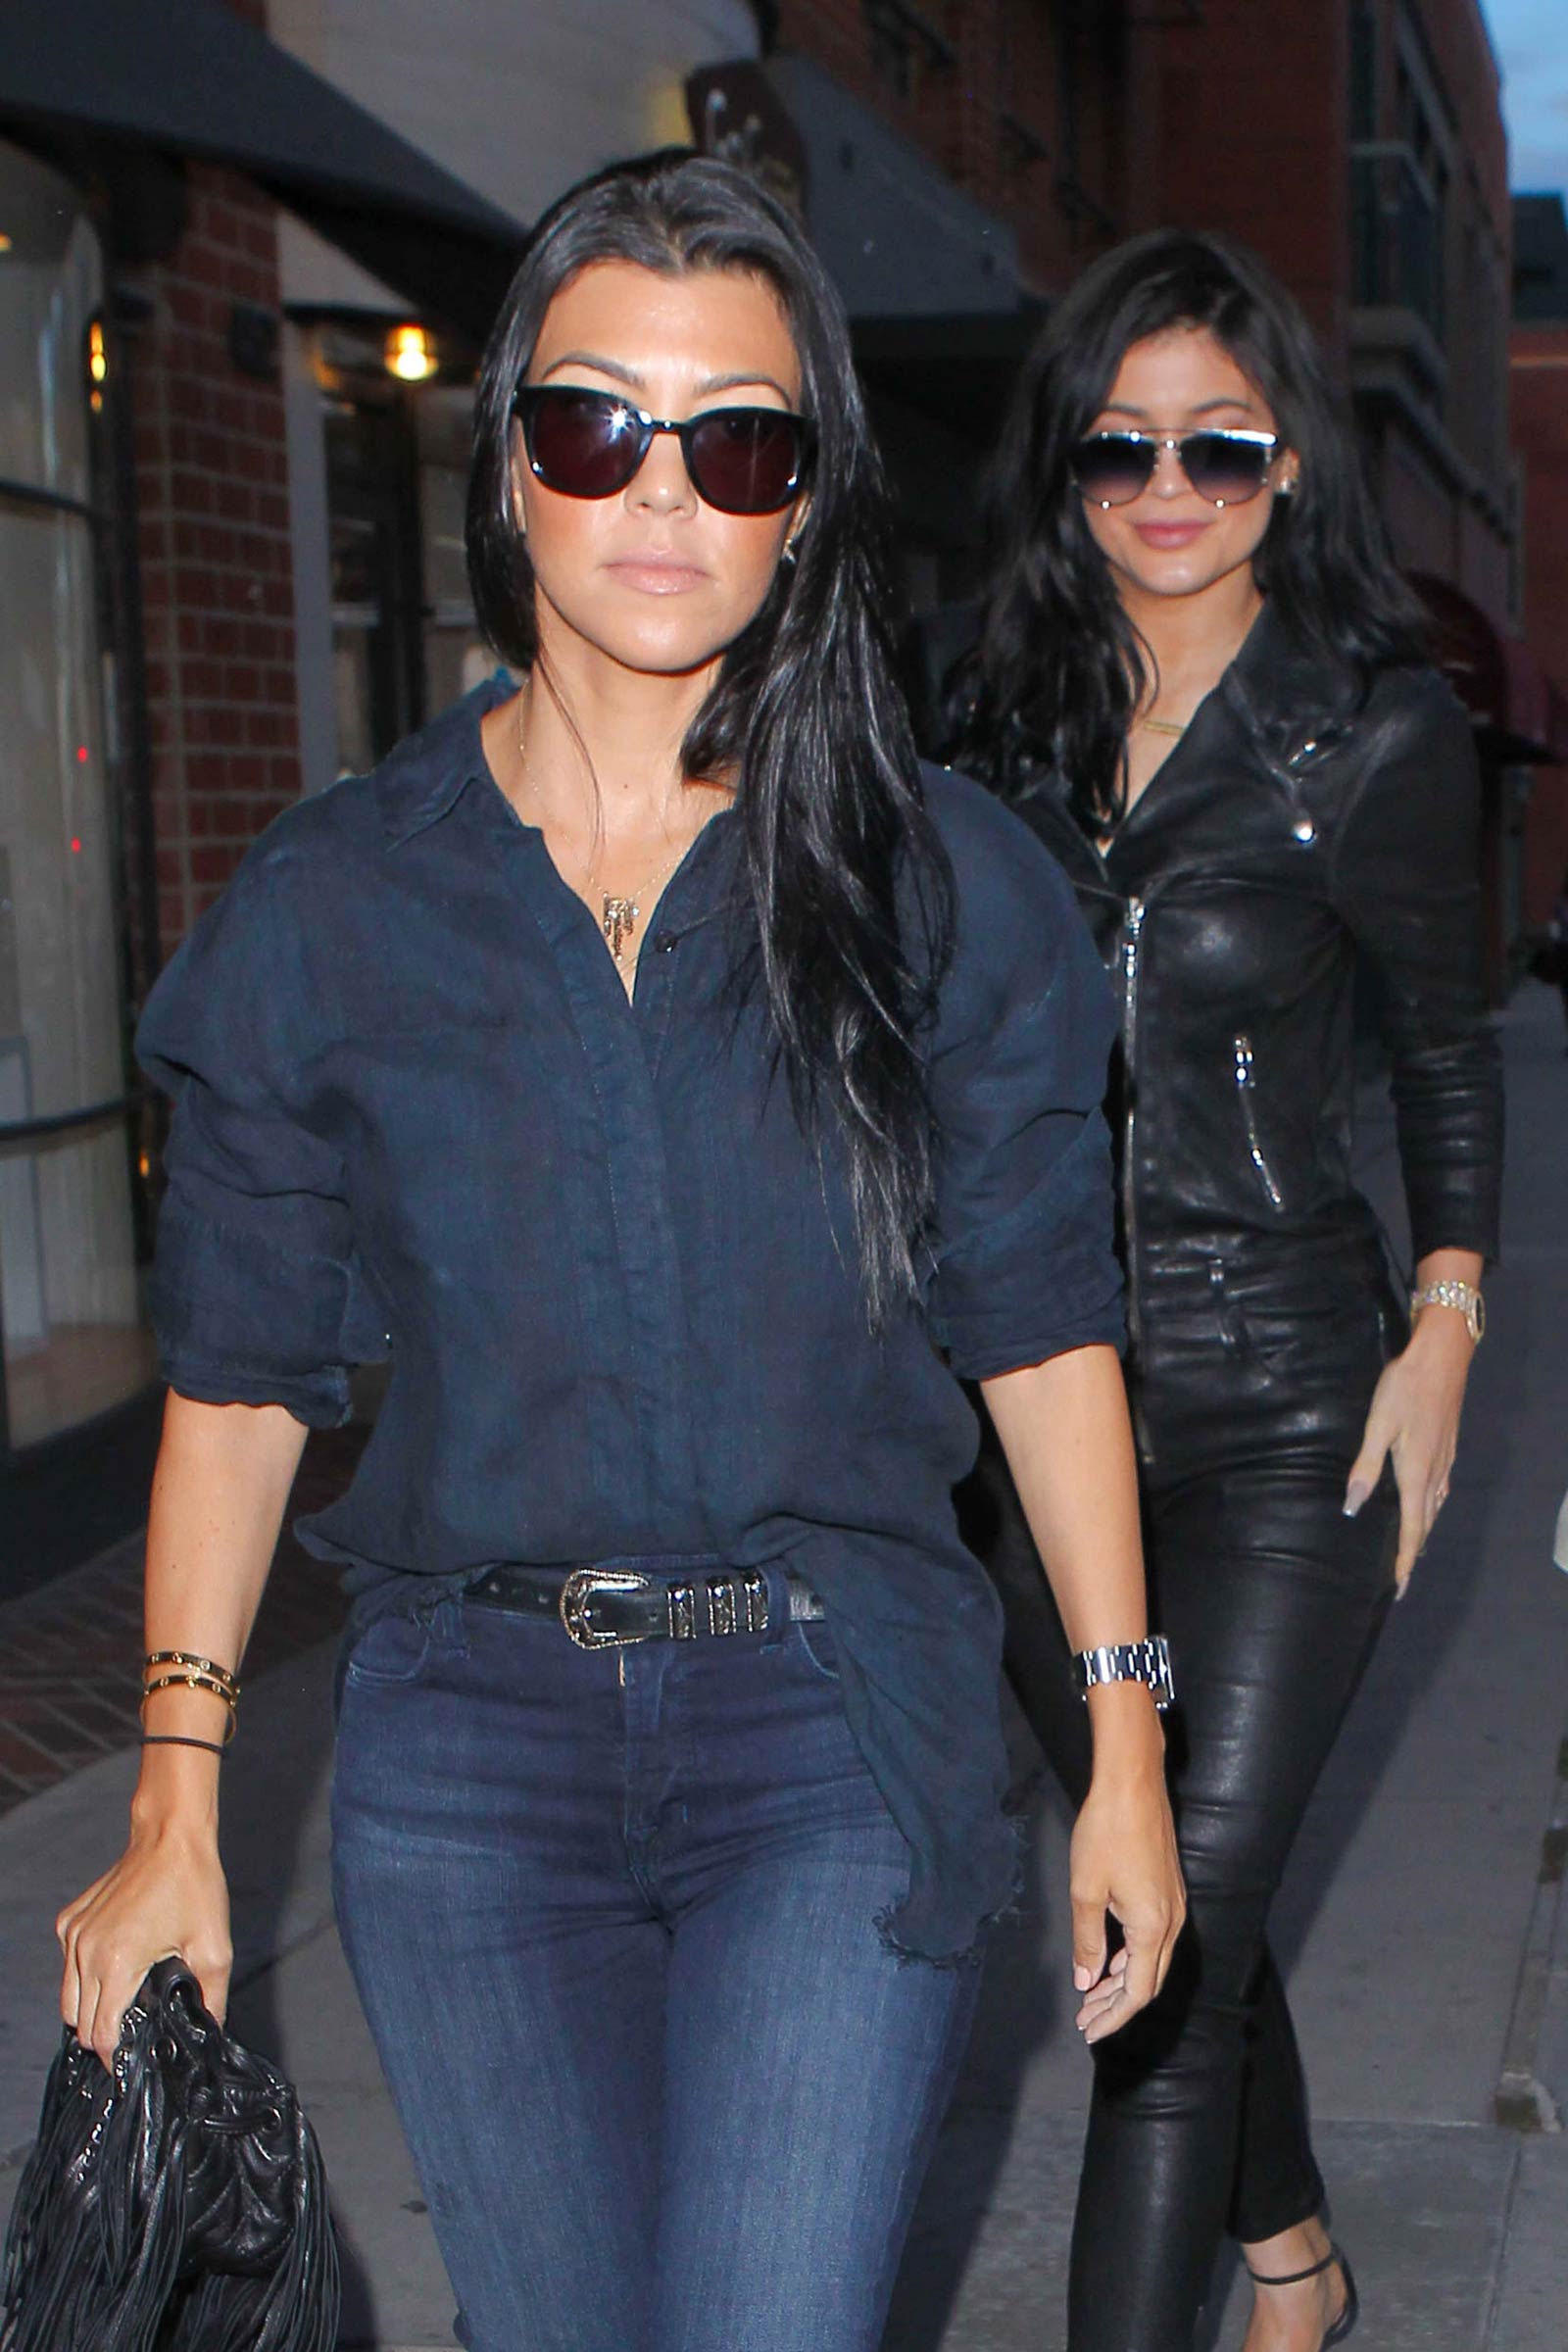 Kylie Jenner and Kourtney Kardashian out in Beverly Hills